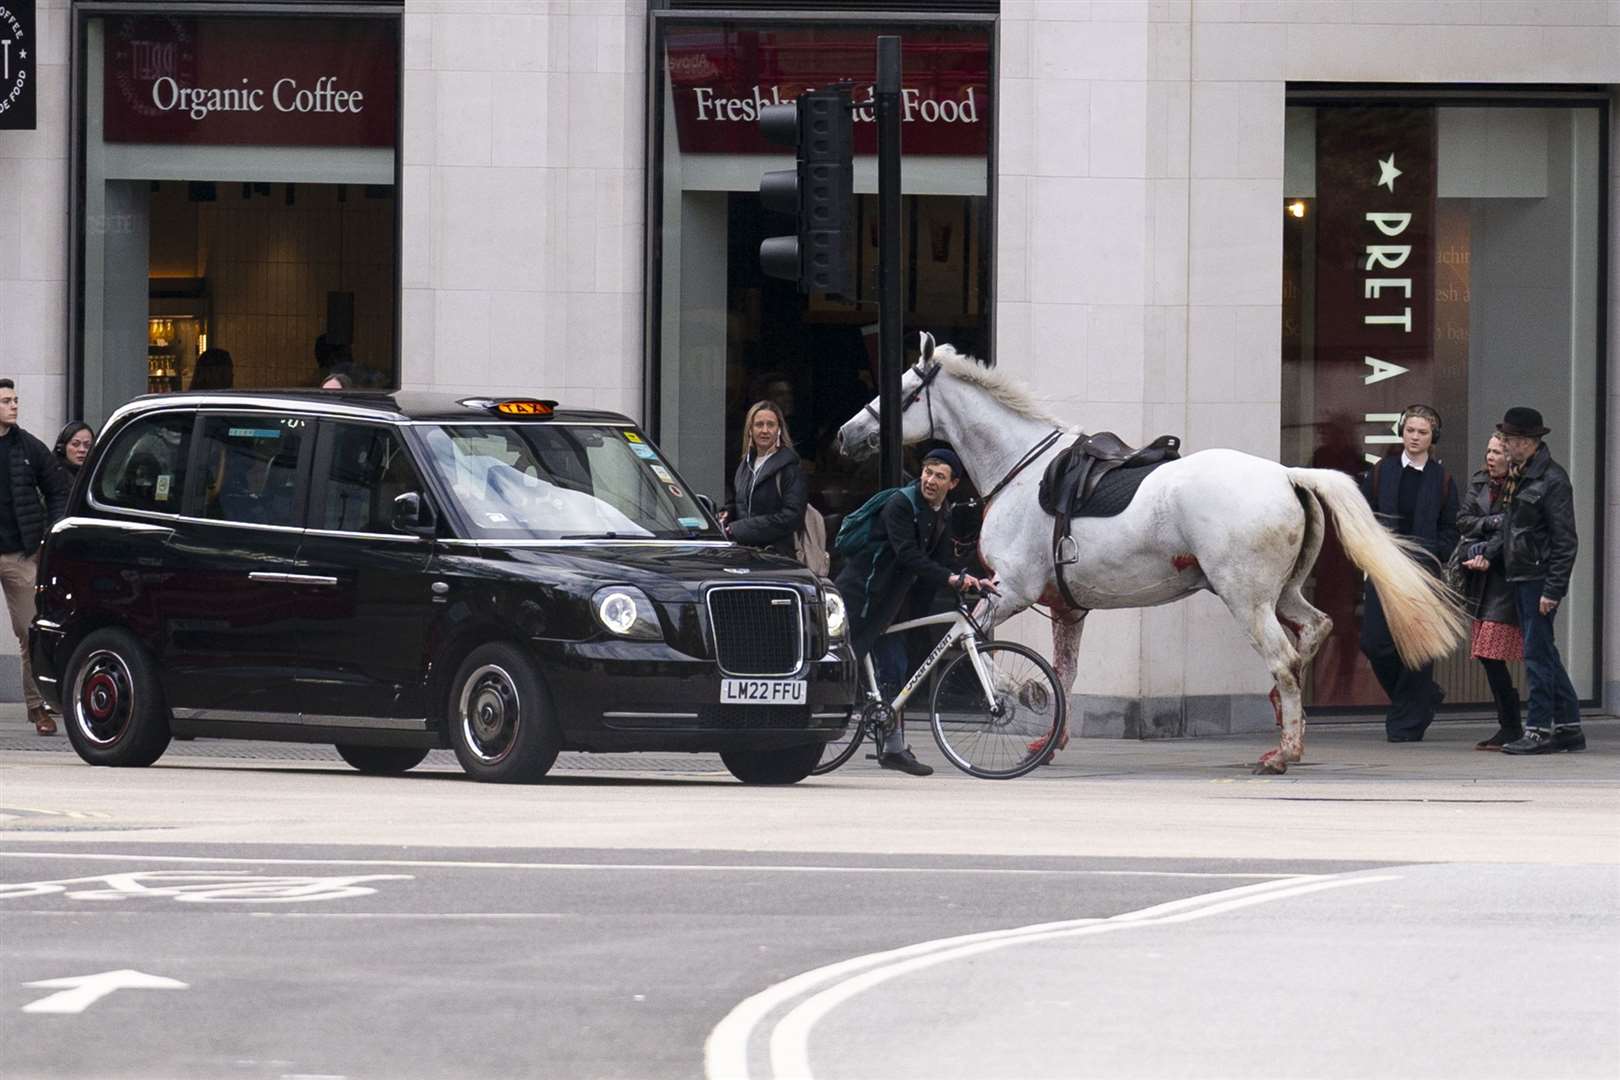 The white horse appeared to have been injured, with blood visible on its body and legs (Jordan Pettit/PA)